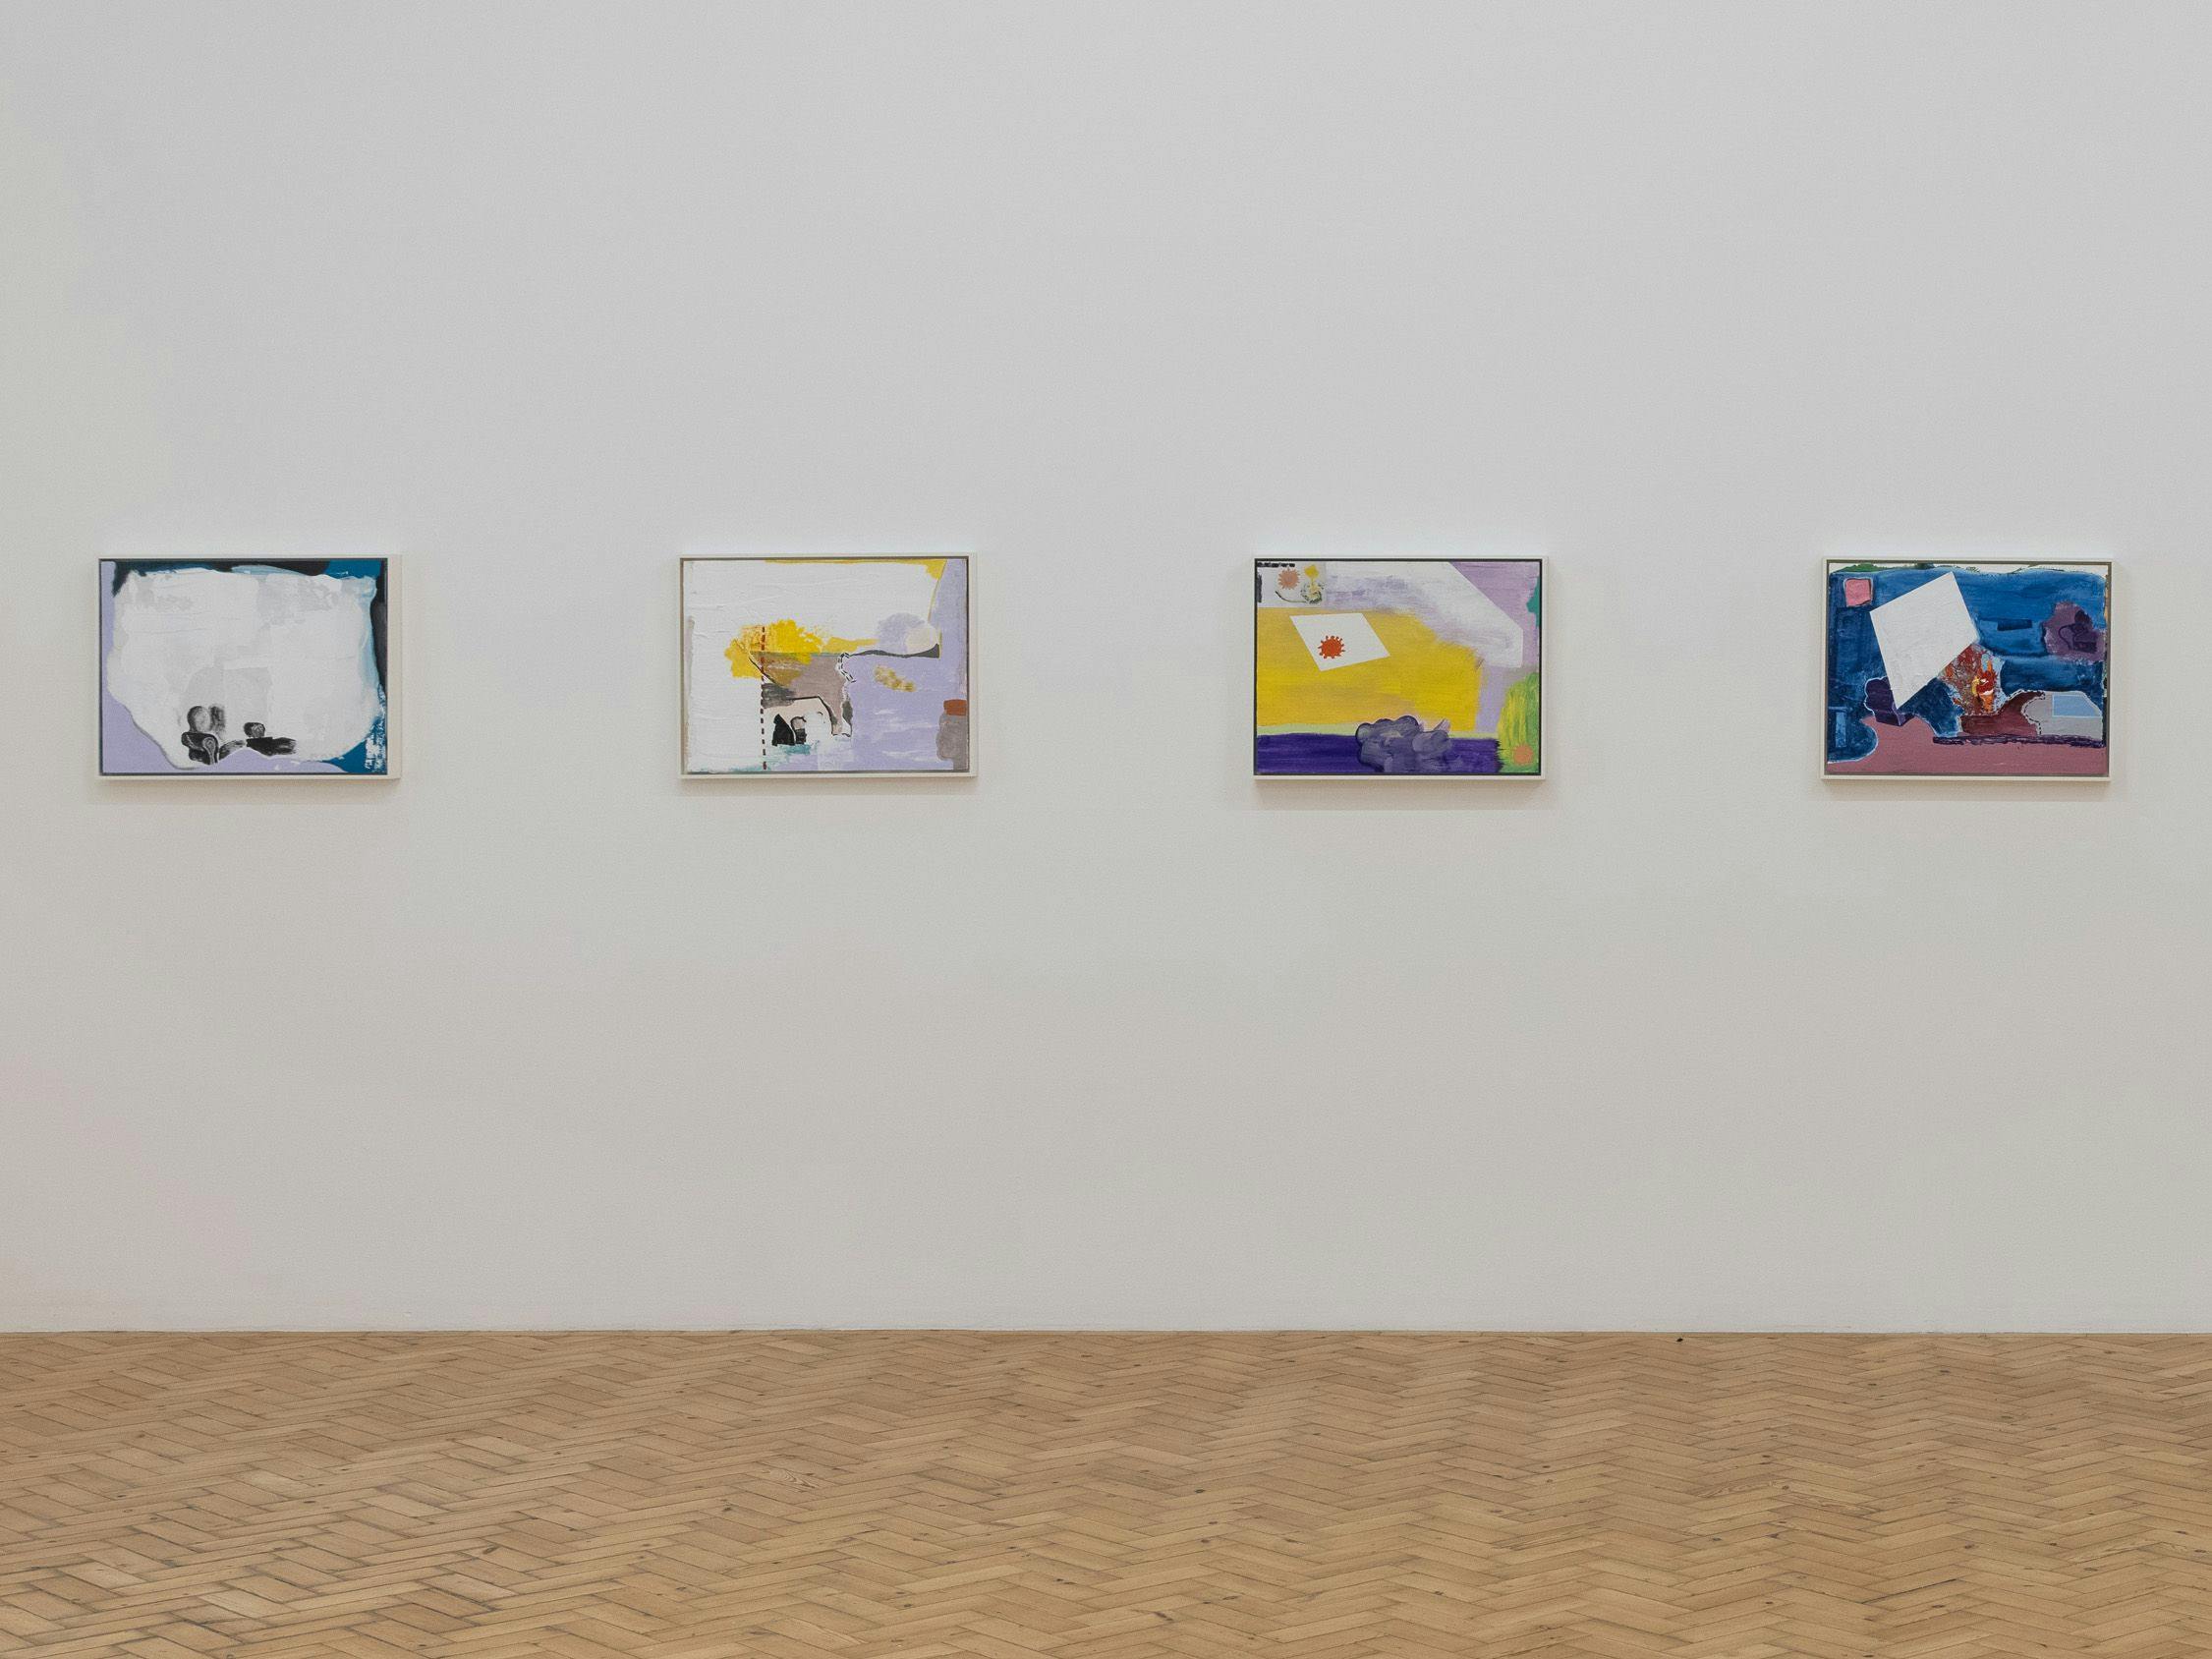 An installation view of the exhibition, Walter Price: Pearl Lines, at Camden Art Centre in London, dated 2021.